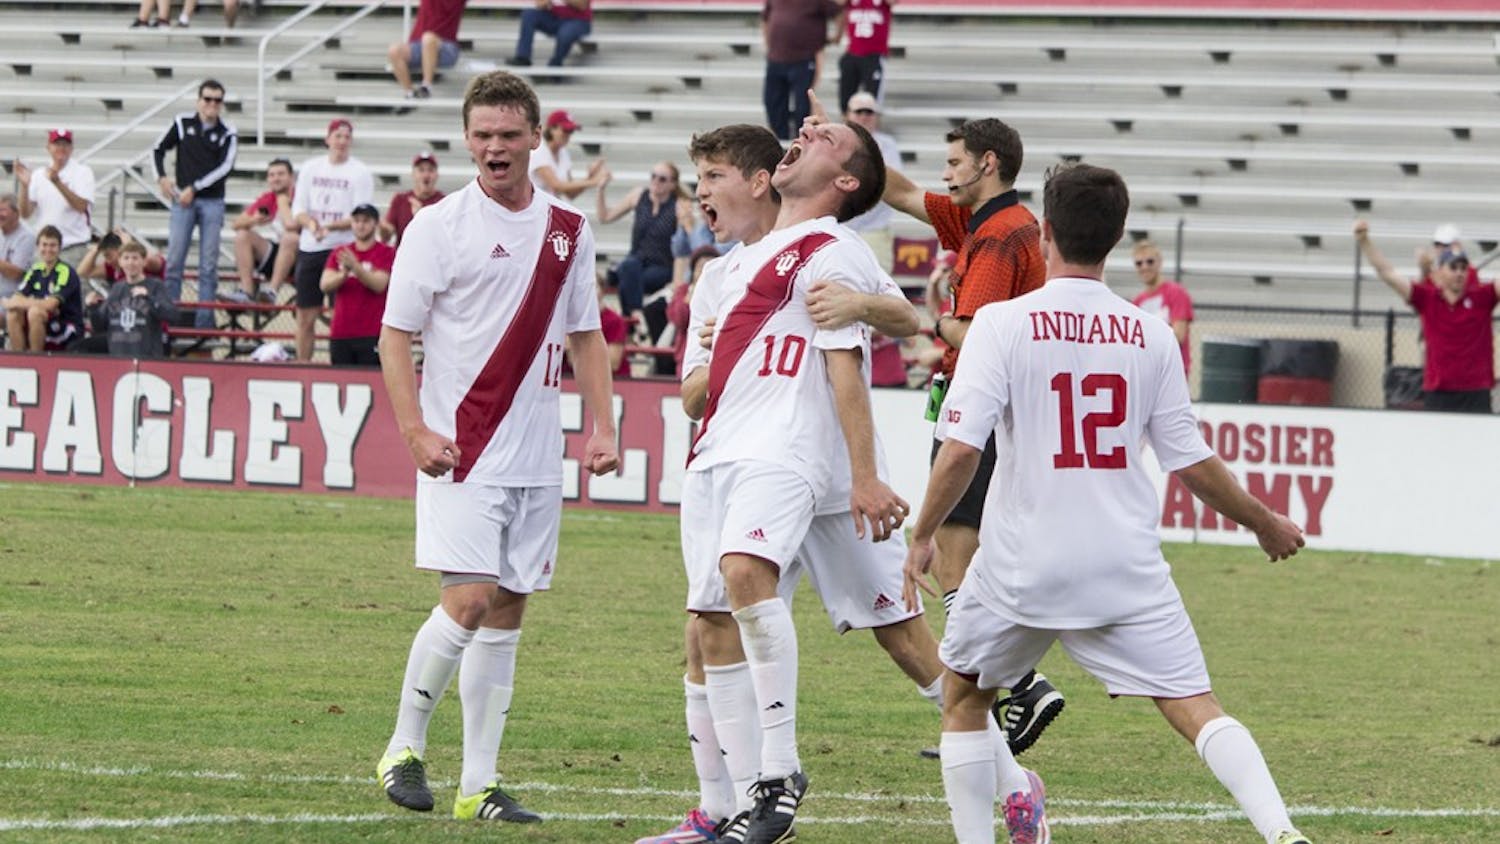 Indiana's Tanner Thompson celebrates his game winning goal with teammates in Sunday afternoon's 2-1 victory over Michigan State at Bill Armstrong Stadium.